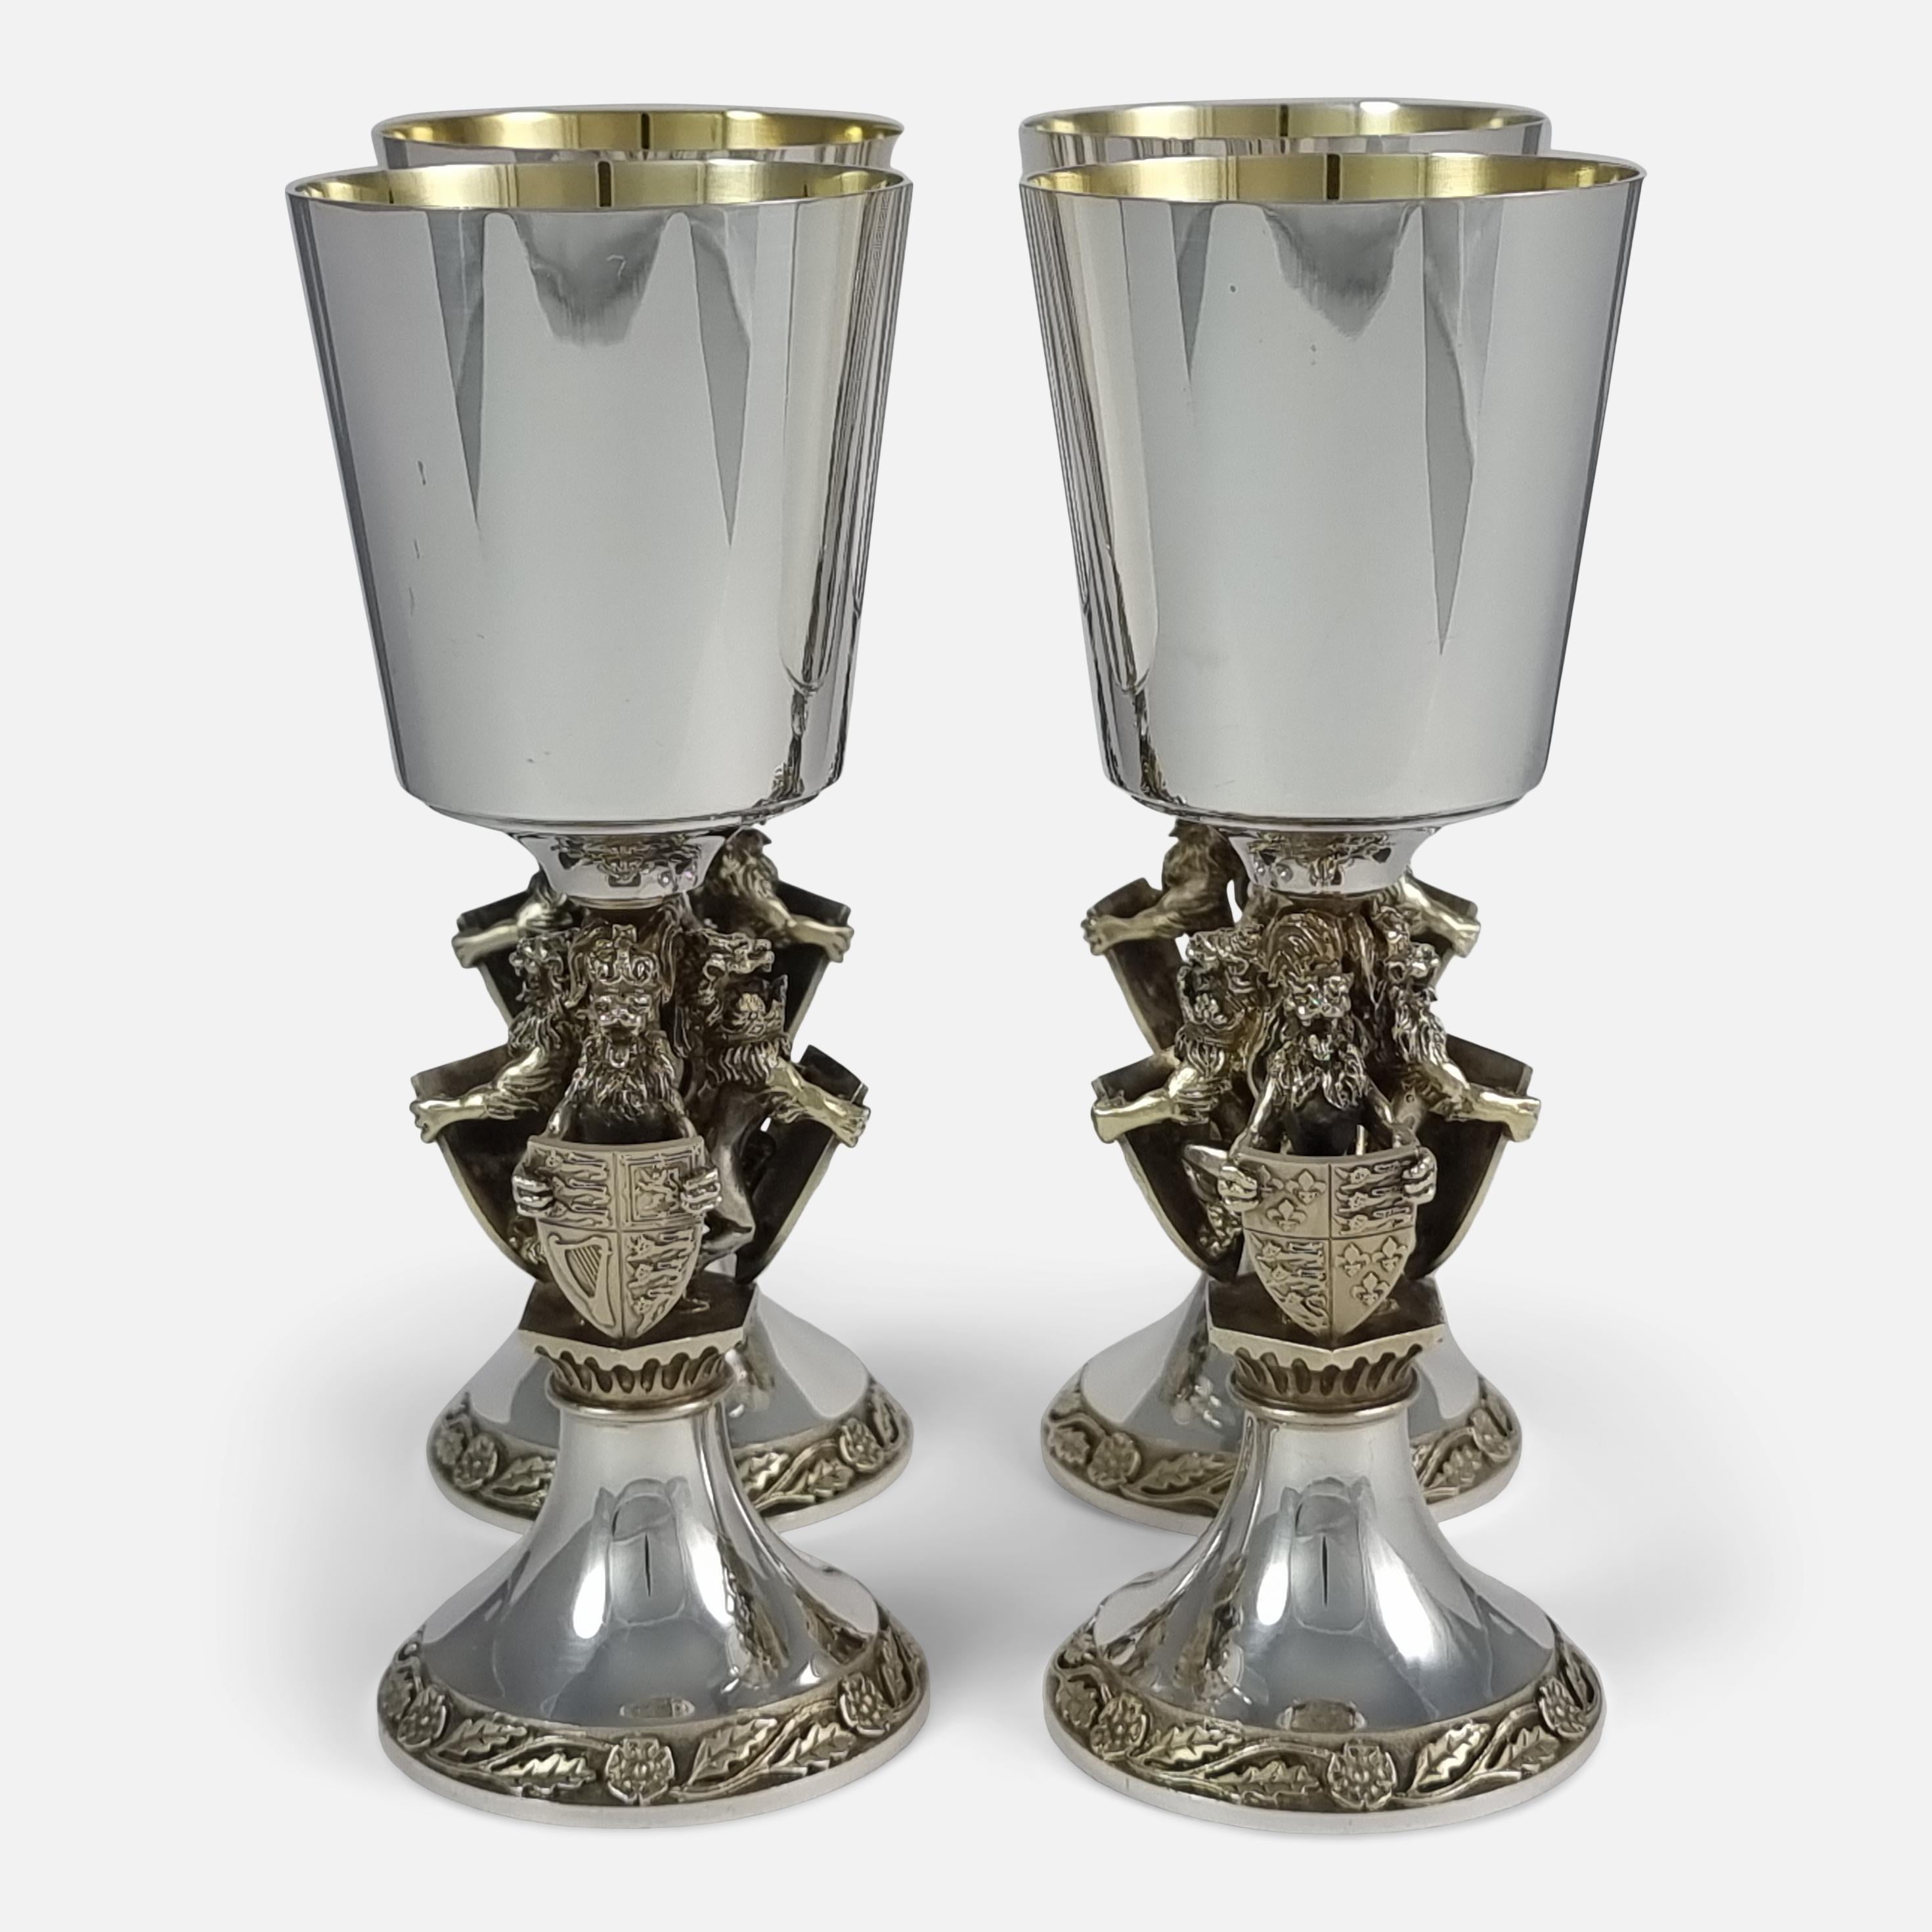 Late 20th Century Set of Four Aurum Silver Gilt 'College of Arms' Goblets, Hector Miller, 1984 For Sale